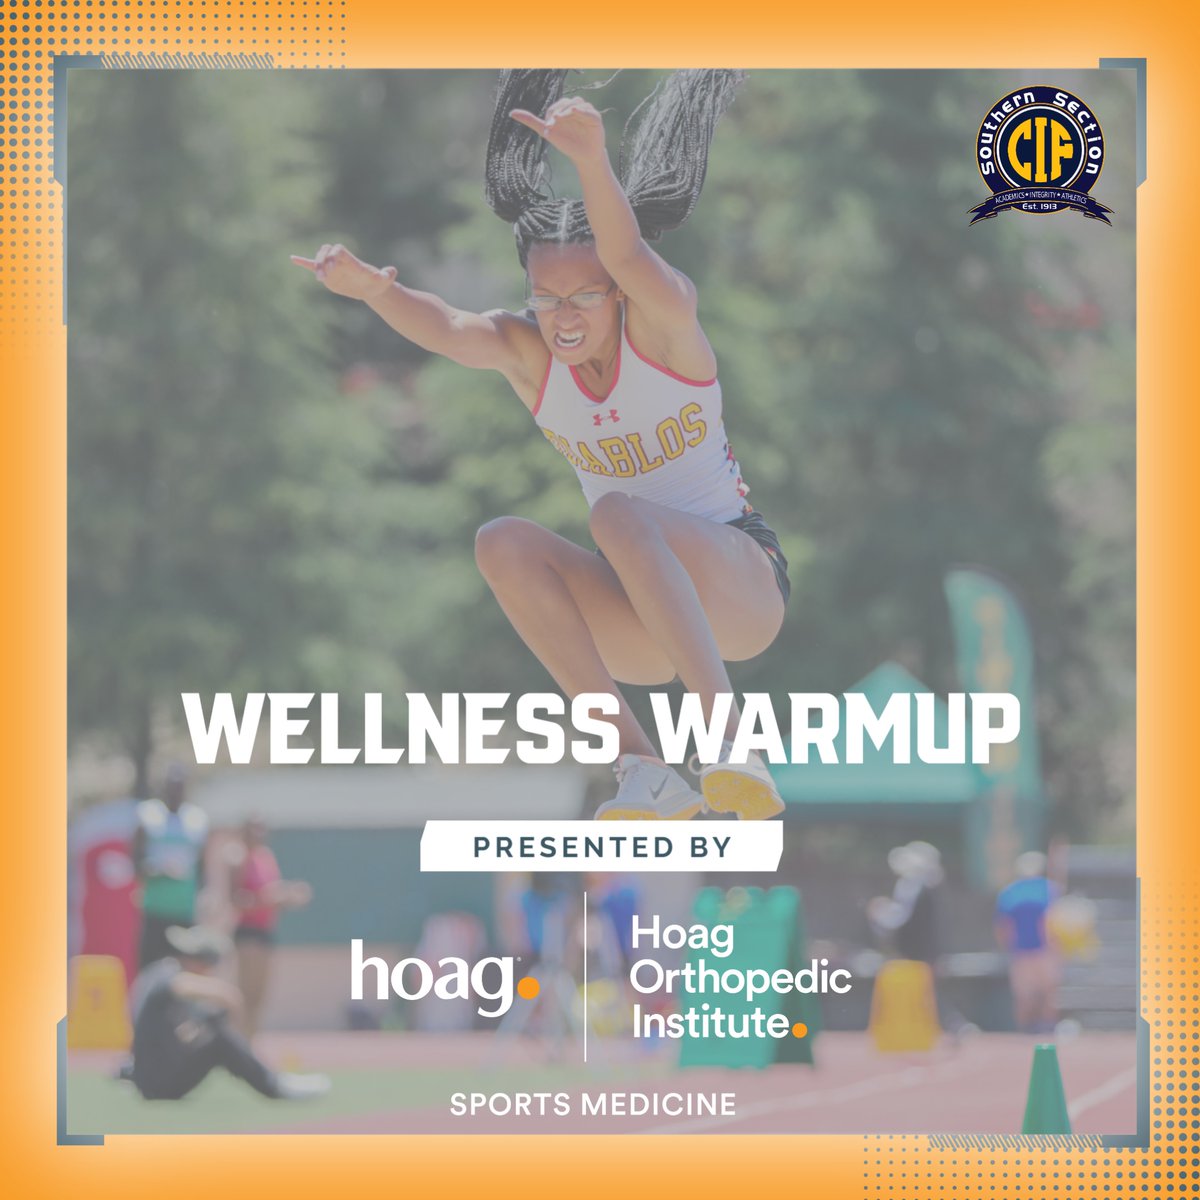 Today's #WellnessWarmup presented by @hoaghealth and @hoagorthopedic digs into specifics of patellar injuries and why female athletes may be more susceptible to patellofemoral pain. Check out the link in our bio to learn more!🔗